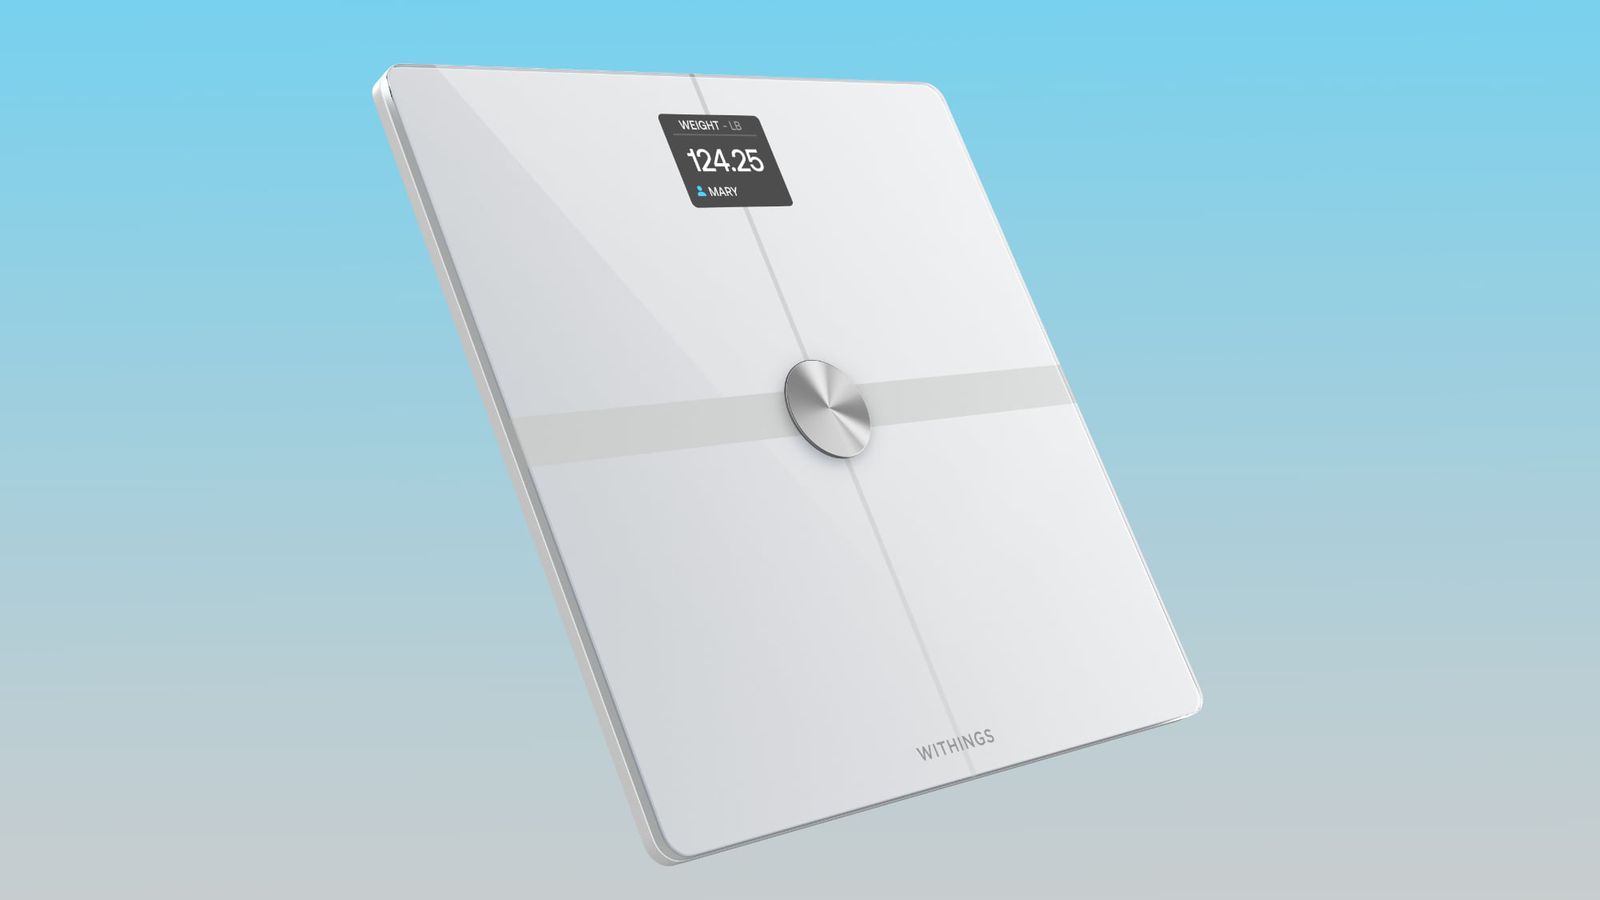 https://images.macrumors.com/t/tH_HJr9No89xebL07YqefACYweQ=/1600x0/article-new/2023/04/withings-smart-scale.jpg